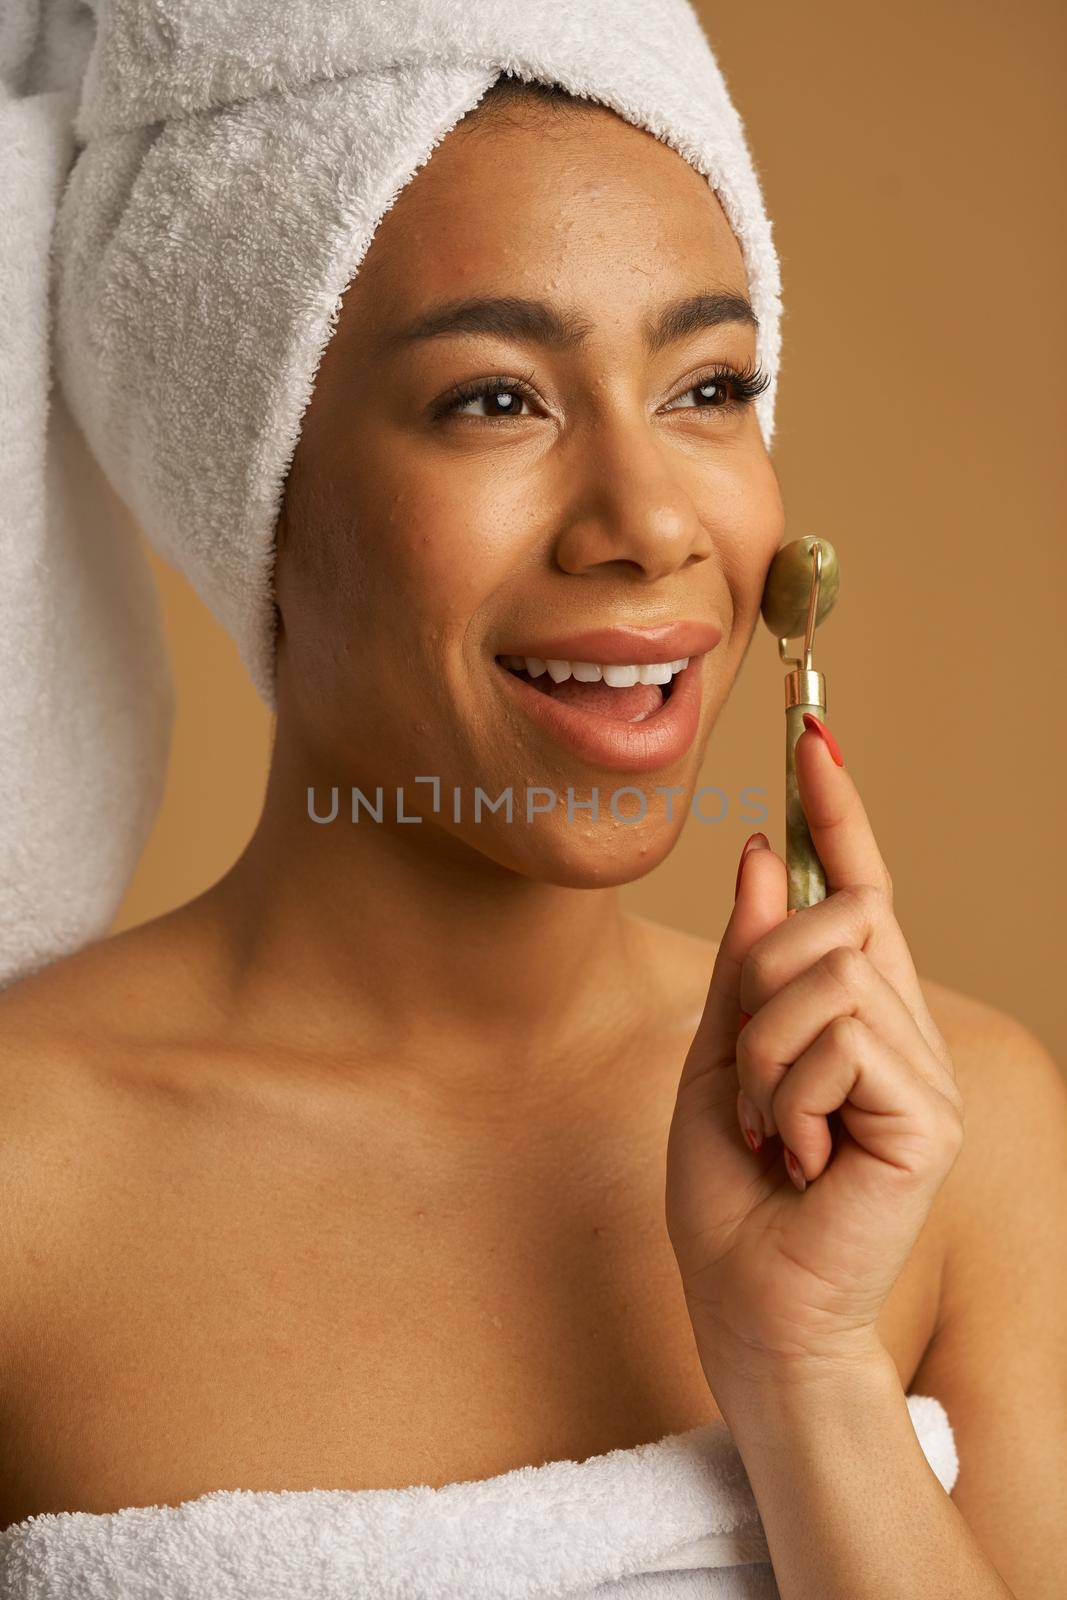 Portrait of happy young woman after shower smiling while using jade roller for massaging her face isolated over beige background. Skincare concept